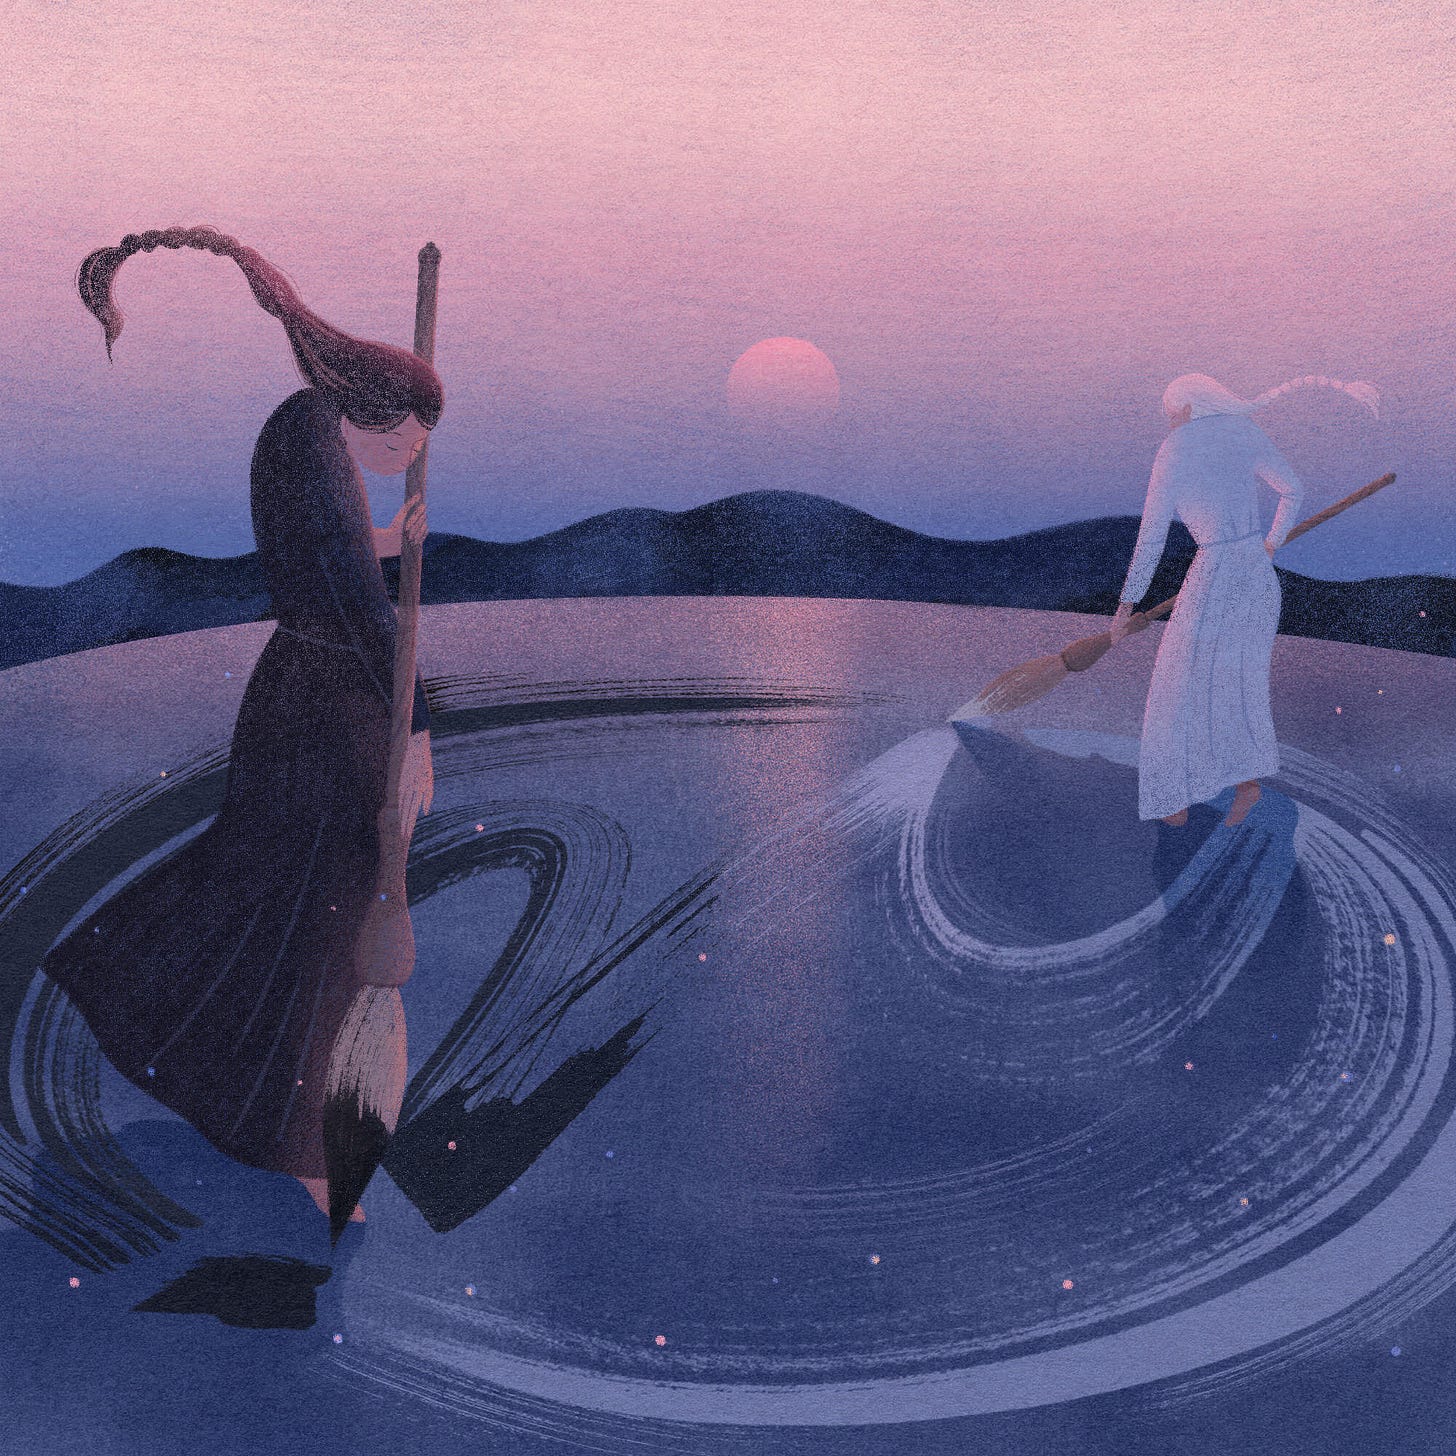 Two figures, with long robes and plaited hair, carry large calligraphy brushes and appear to walk in a circle, leaving behind them a trail of paint. Behind them are mountains and a rising sun.